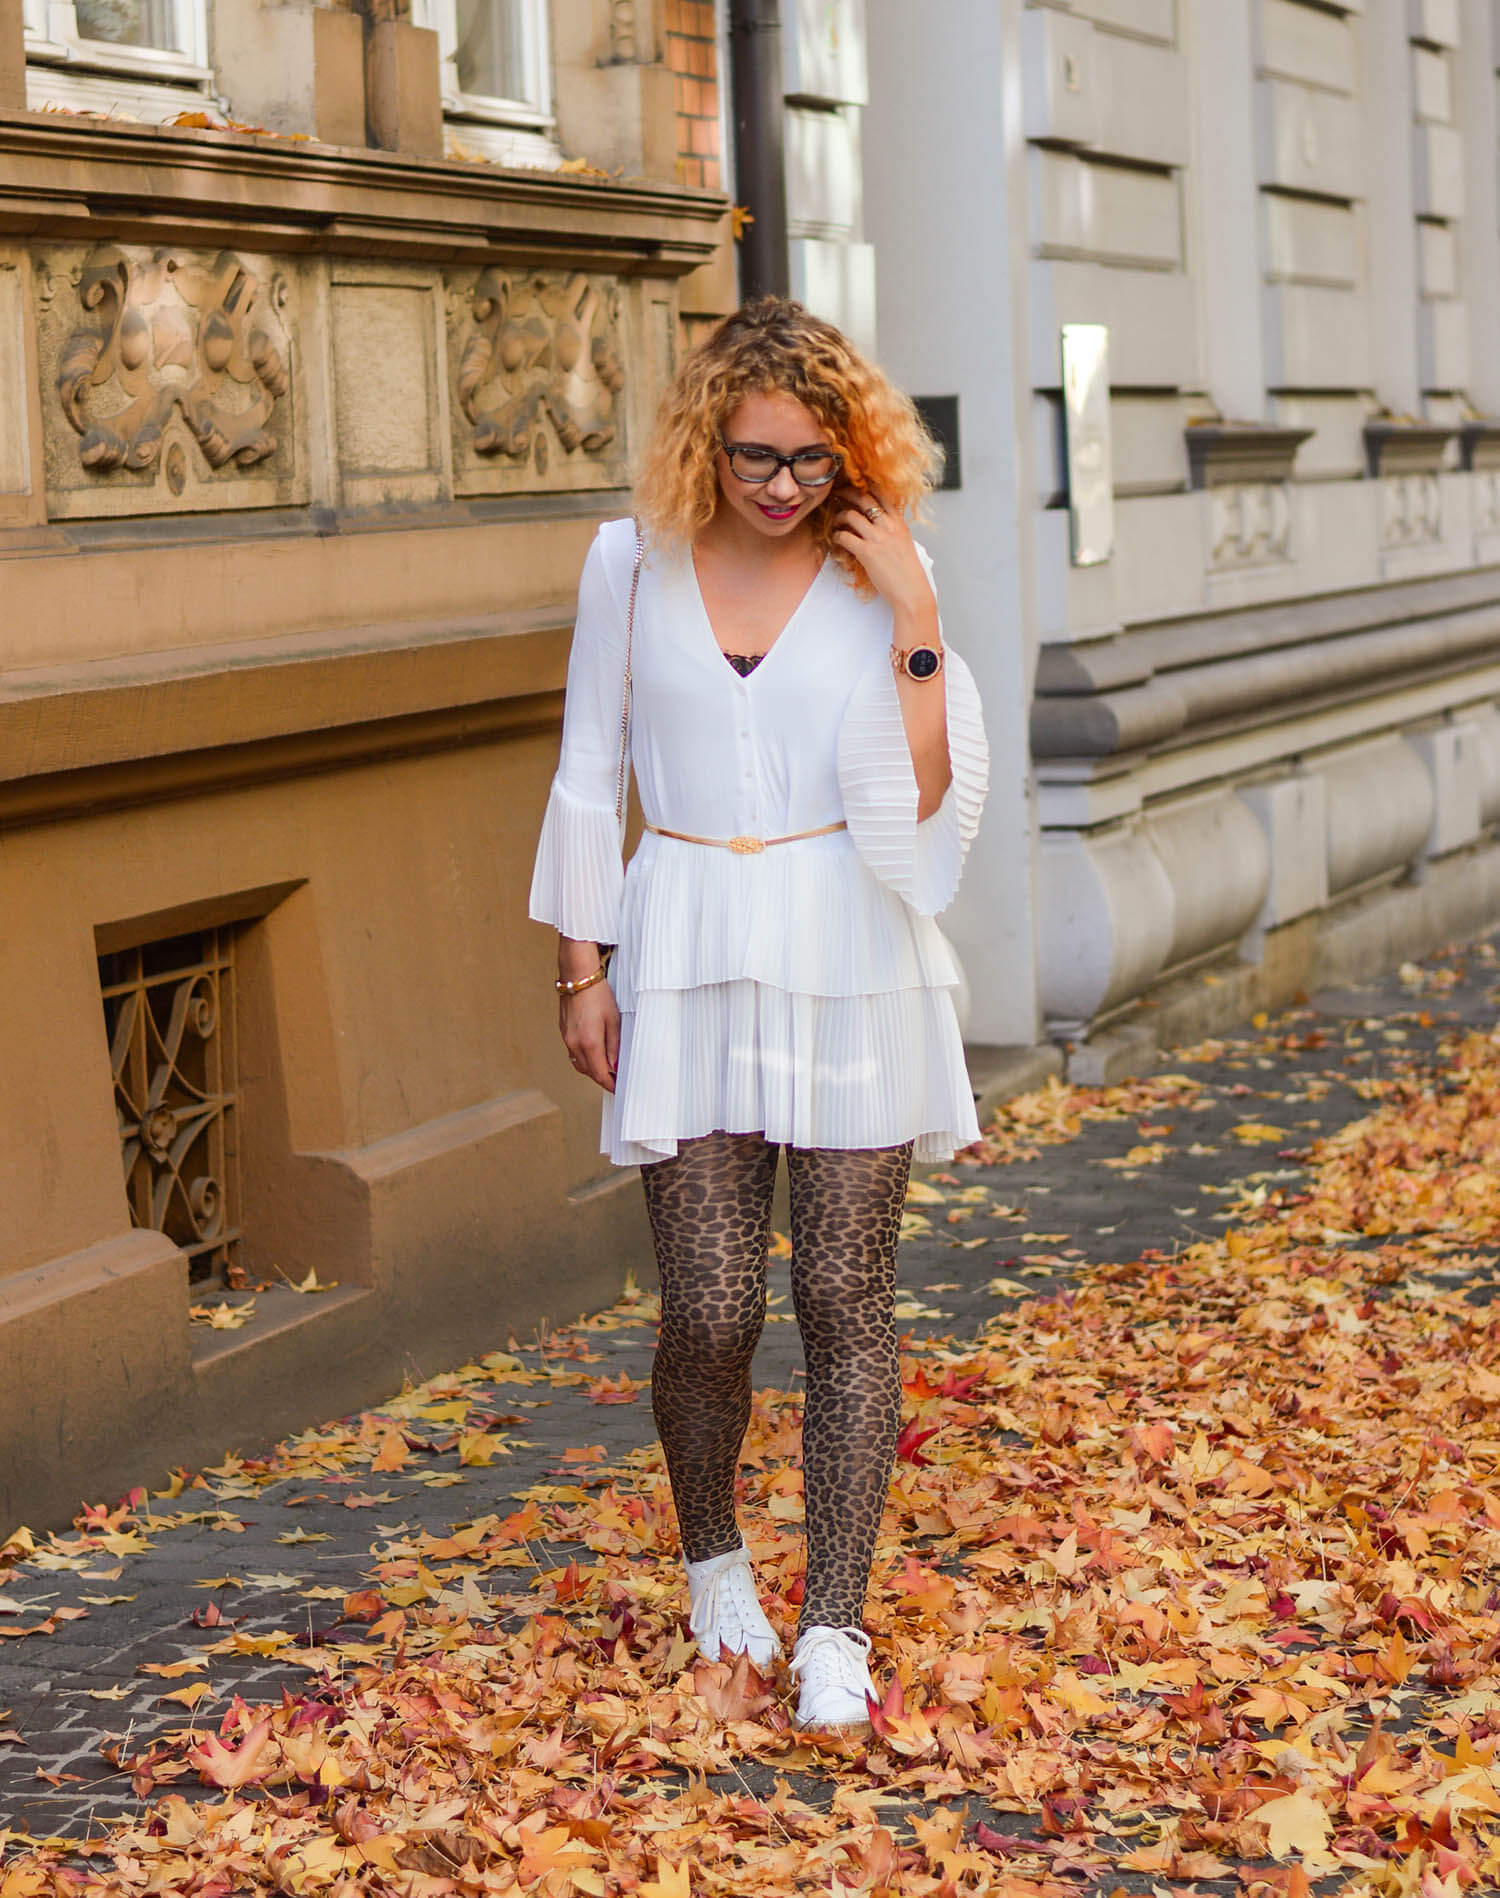 Leopard-Patterns-White-Blouse-New-Fall-Trend-Outfit-kationette-fashionblogger-germany